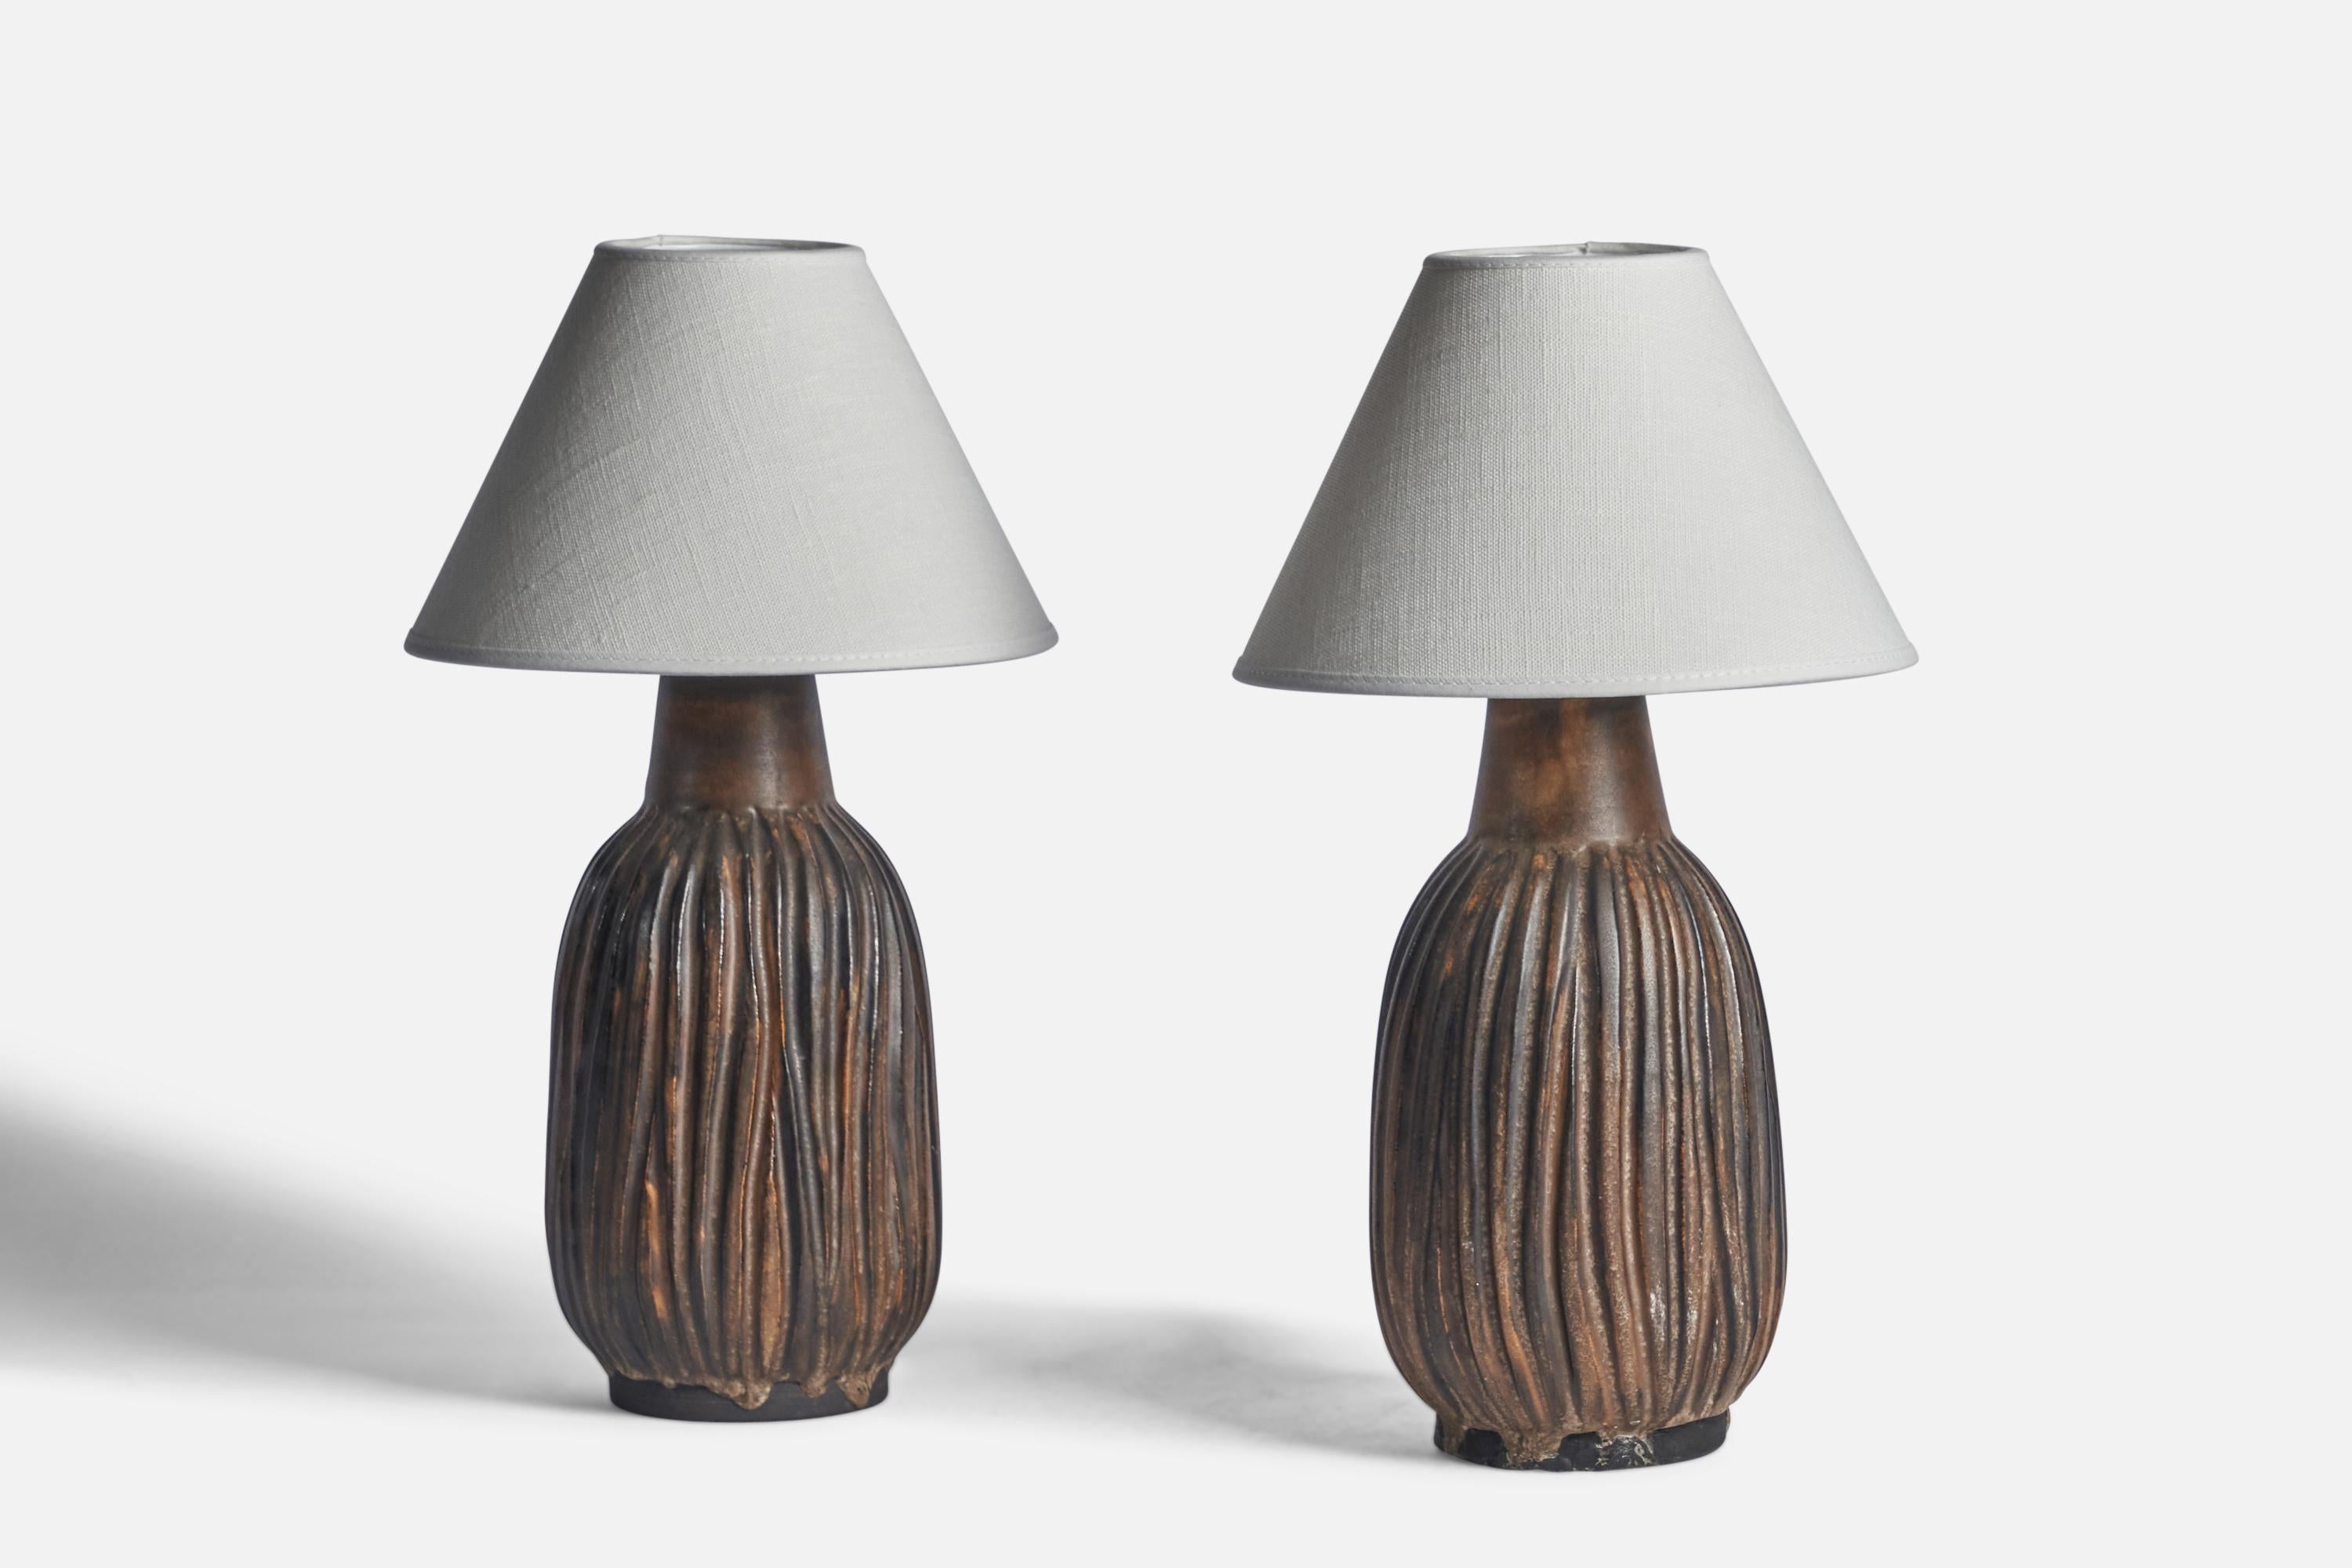 A pair of brown-glazed fluted table lamps designed by Irma Yourstone and produced by Lerlaxen, Sweden, 1960s.

Dimensions of Lamp (inches): 11.65” H x 4.75” Diameter
Dimensions of Shade (inches): 3” Top Diameter x 10” Bottom Diameter x .5”